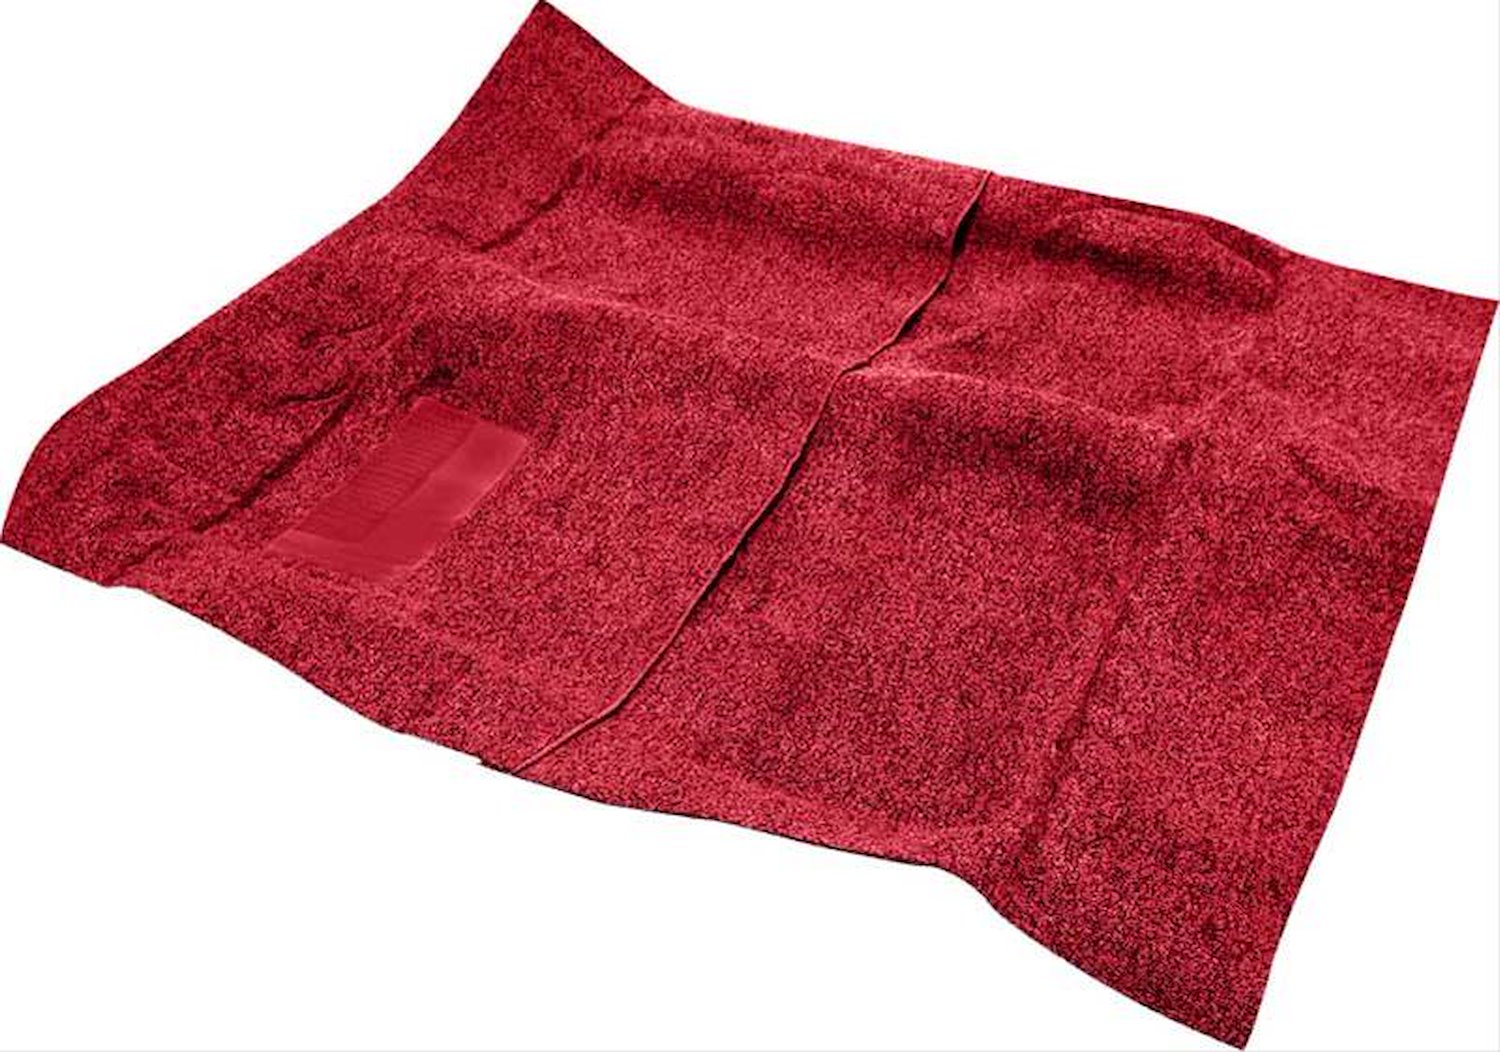 MB9851003 Loop Carpet 1963-64 Plymouth Fury 2-Door With 4-Speed (Except 63 Sport Fury) Red Tuxedo